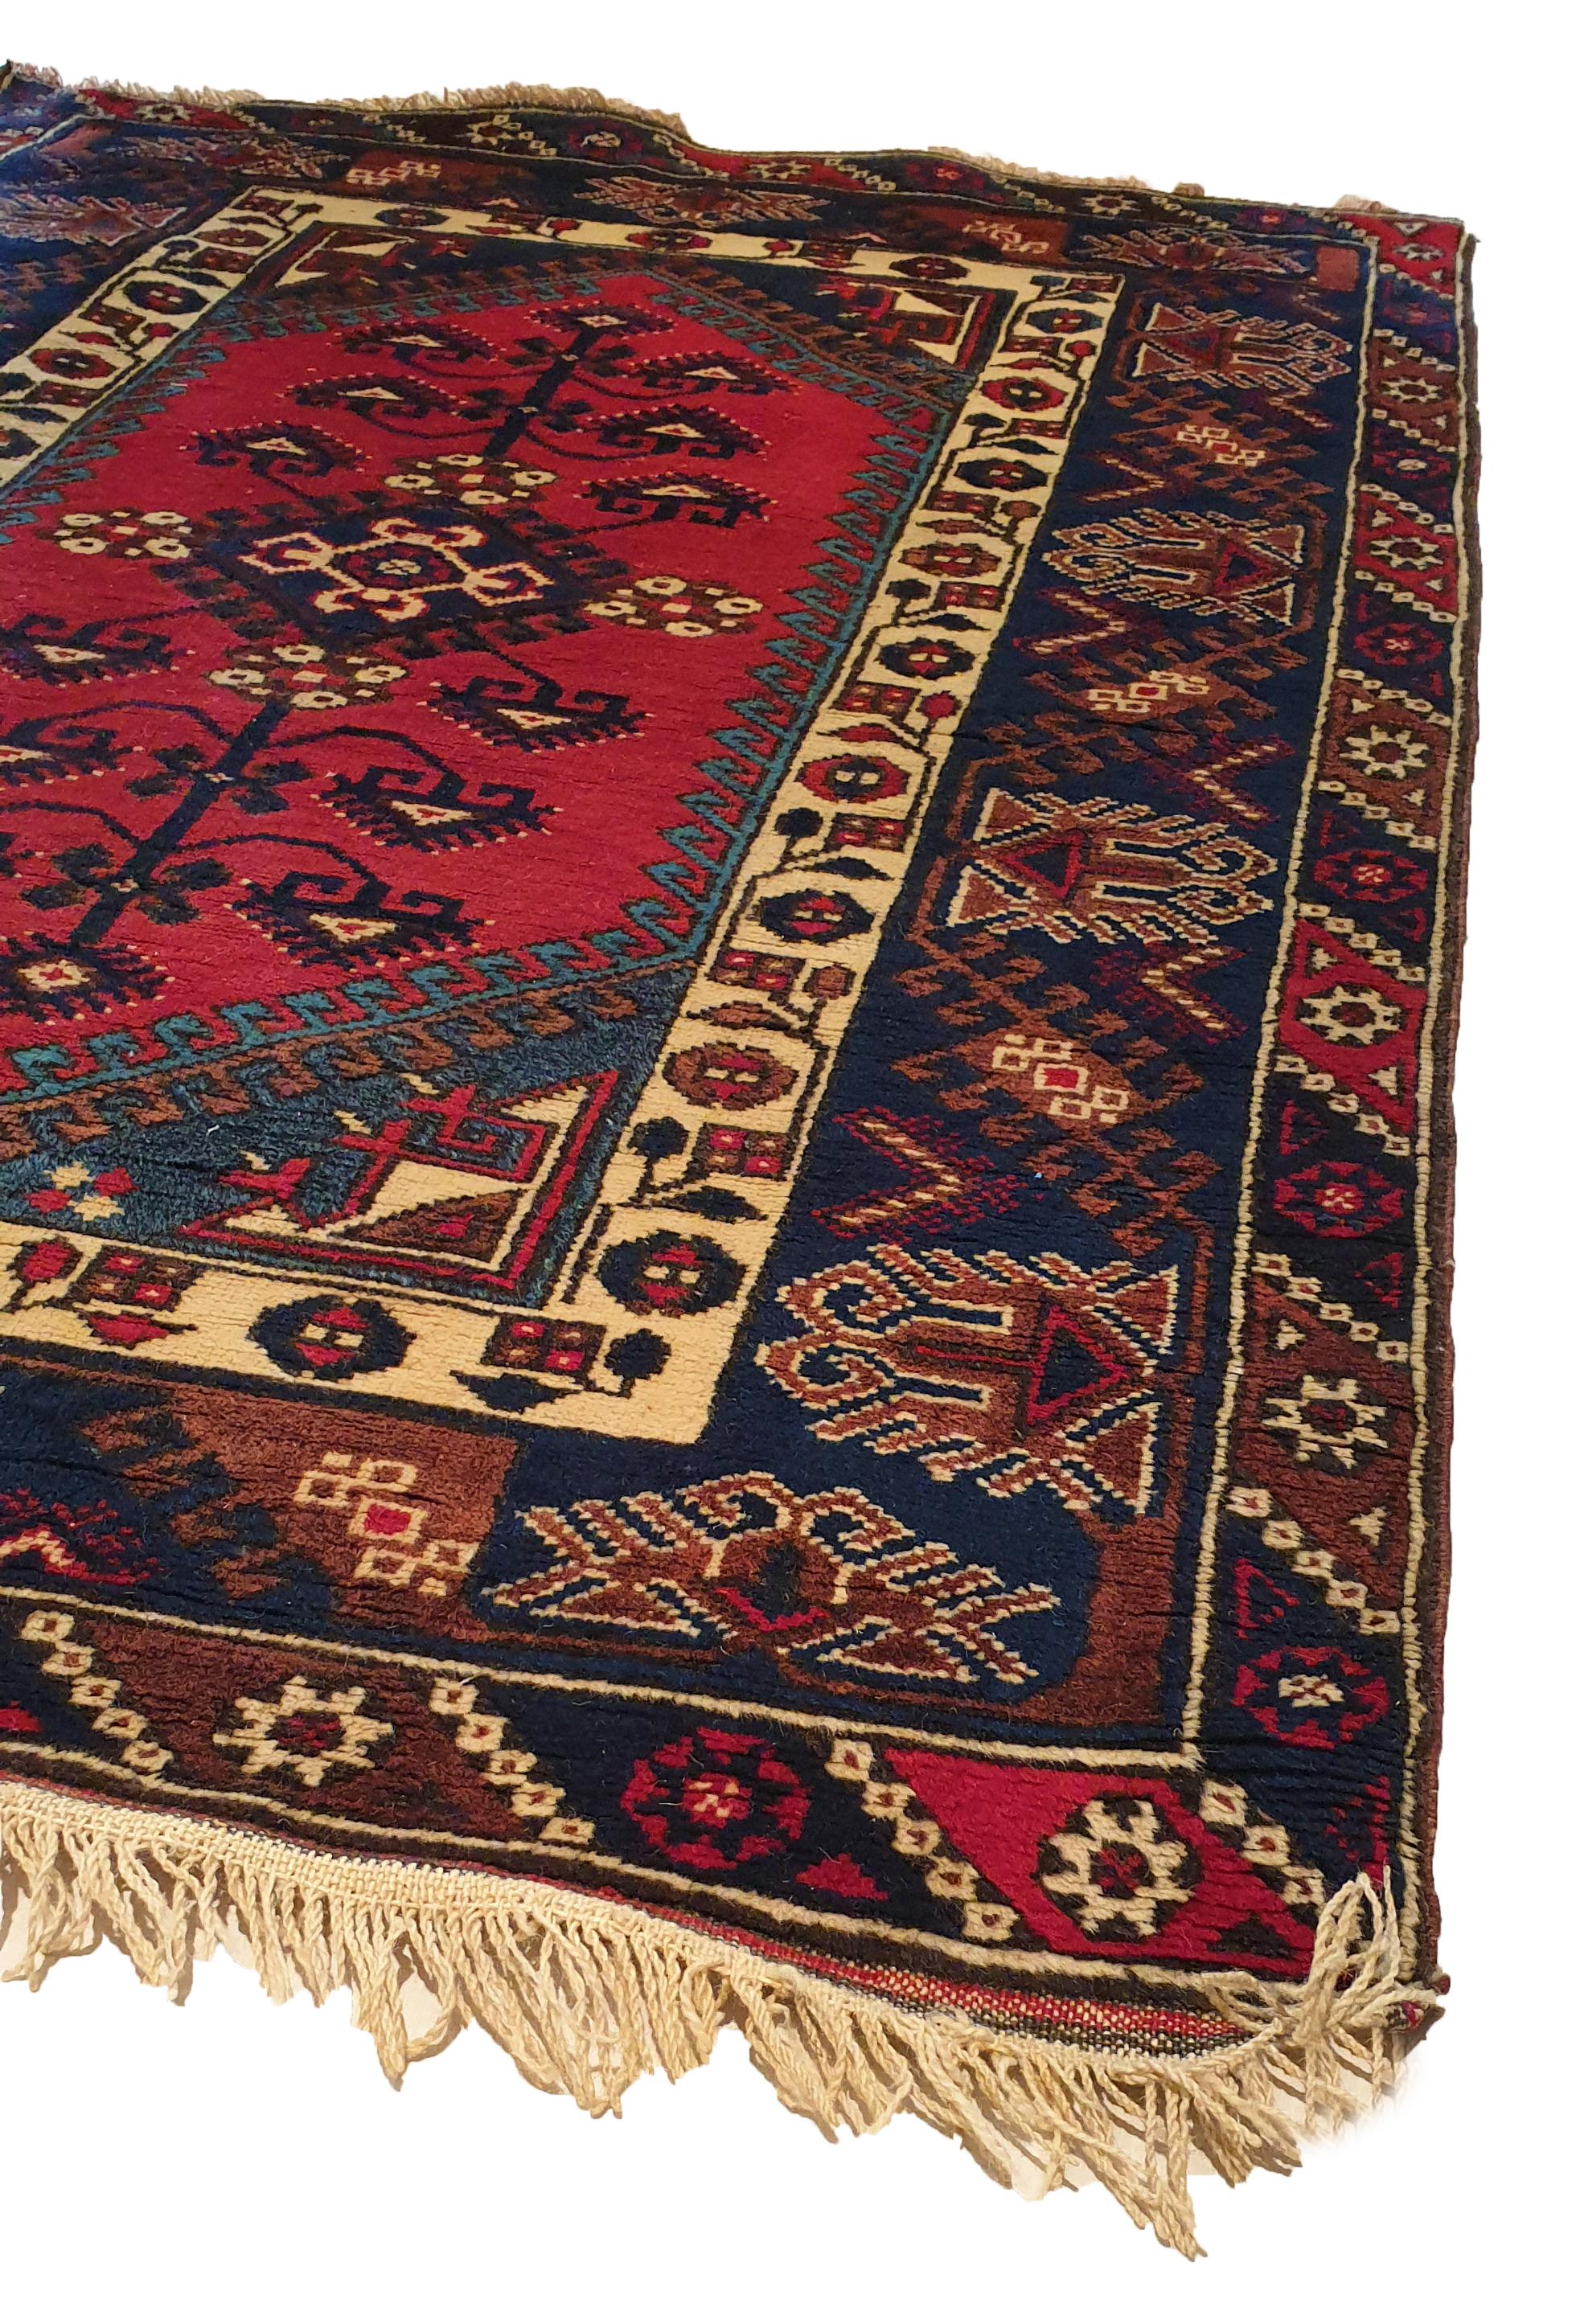 833 - very beautiful mid-20th century Turkish carpet with a nice geometric design and beautiful colors with red, blue and green, completely hand-knotted with wool velor on a wool foundation.